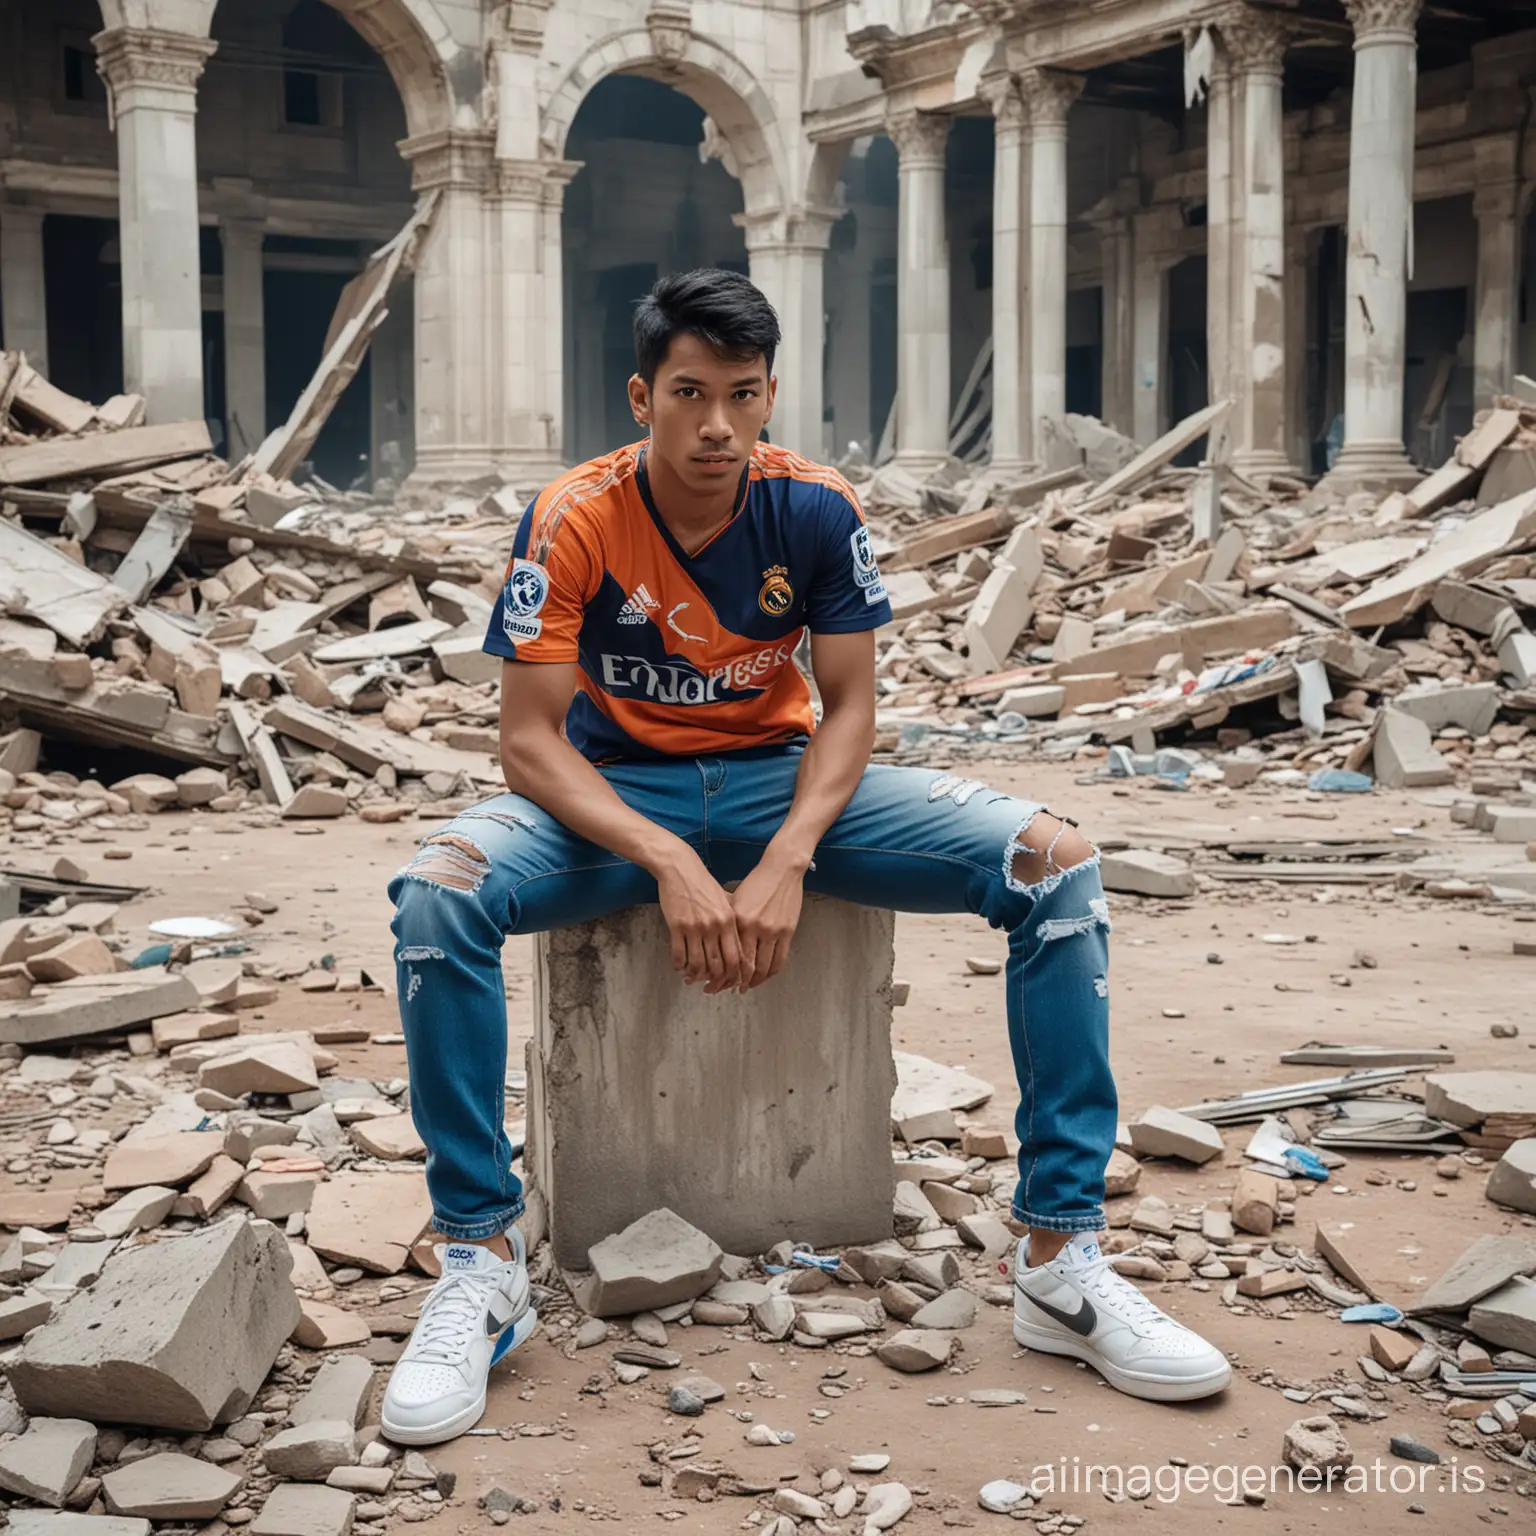 A 28-year-old Indonesian man. Short black hair, wearing a blue Real Madrid jersey, torn jeans at the knees, and Nike shoes. In the background, there is Ultraman and a Giant fighting amidst the ruins of a building.